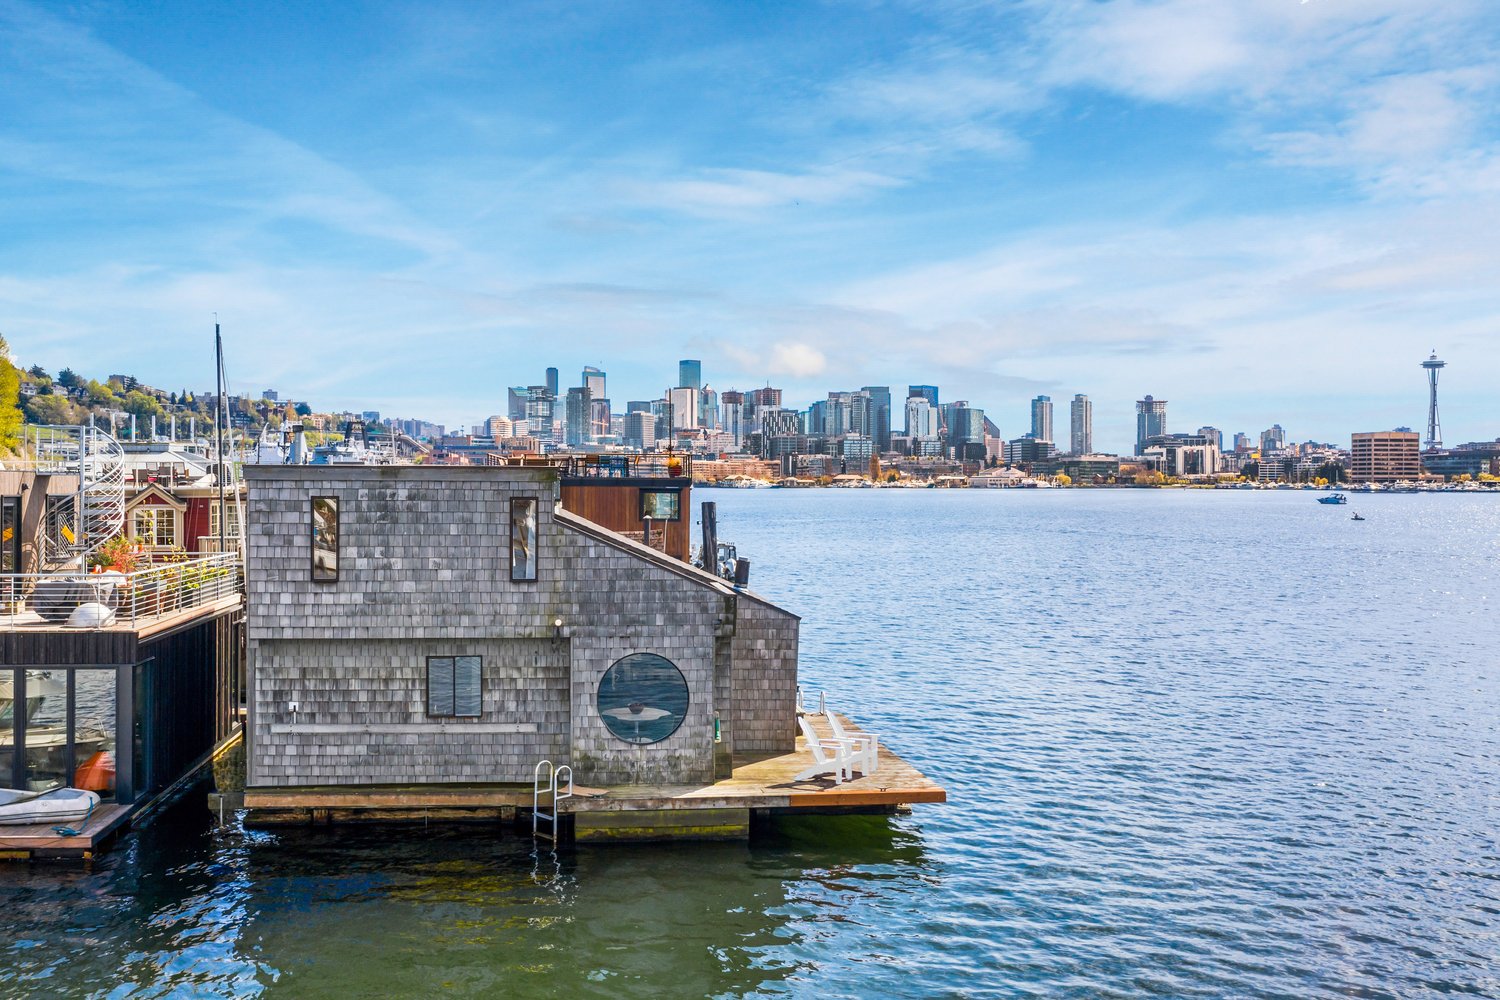 SOLD - $2,300,000 - 2235 Fairview Ave E, Houseboat #16, Seattle, WA